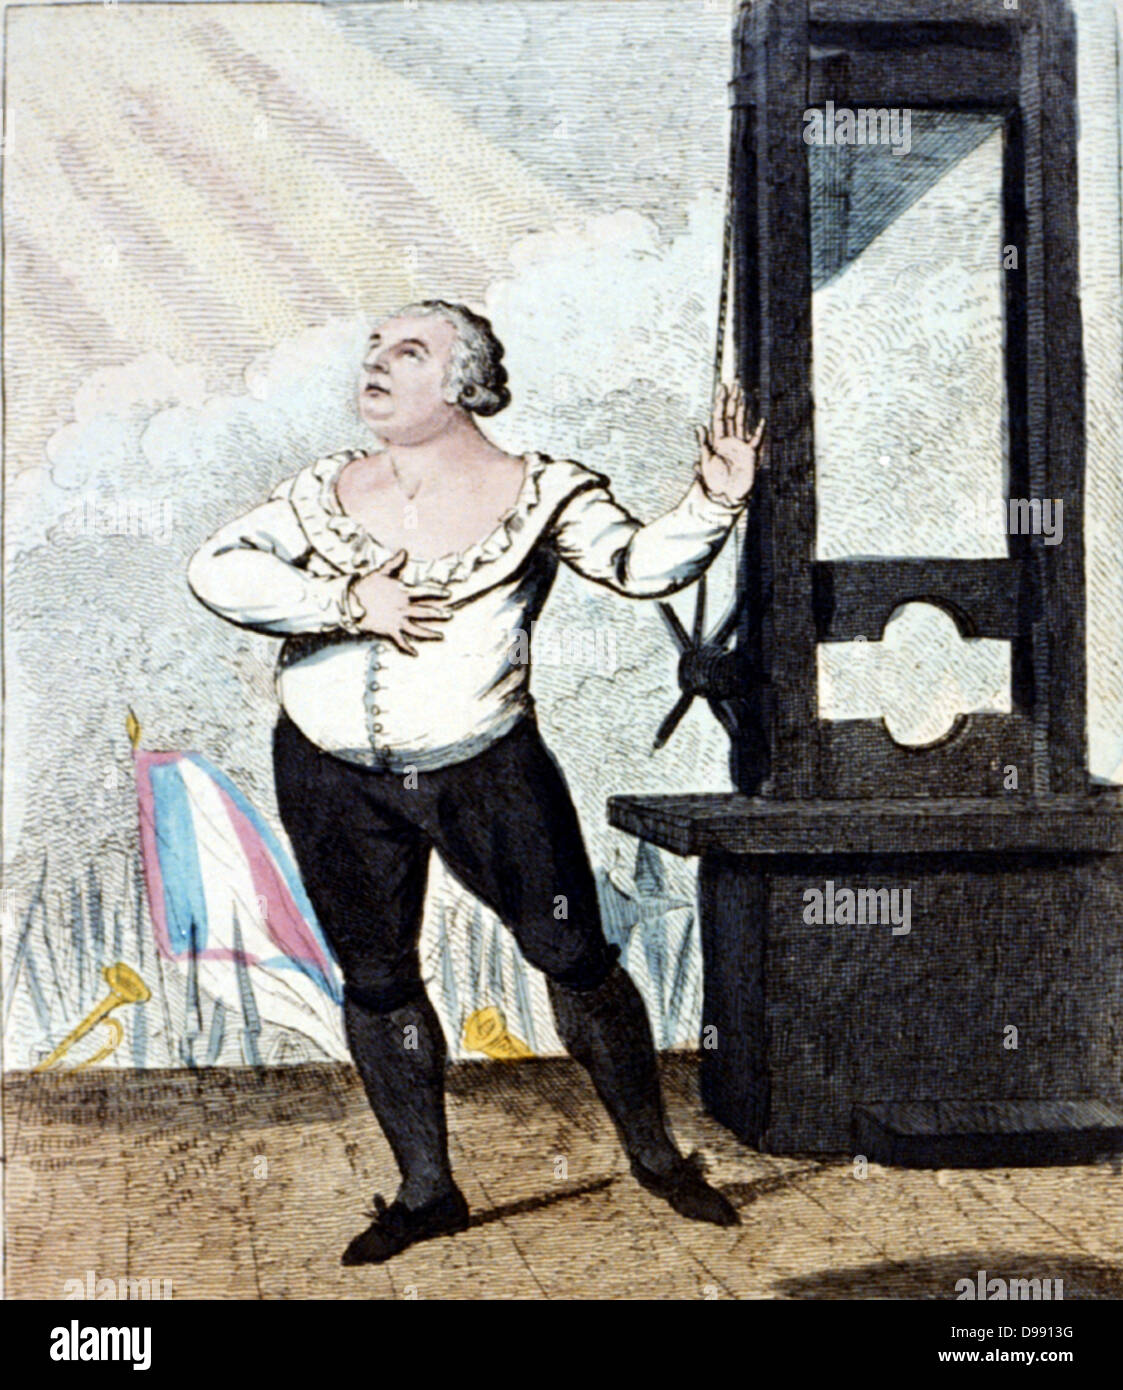 The martyrdom of Louis XVI , King of France -I forgive my enemies, I die innocent!!!' Isaac Cruikshank, 1798. Louis in dramatic pose on the scaffold, next to a guillotine, about to be executed. France French Revolution Regicide Execution Stock Photo